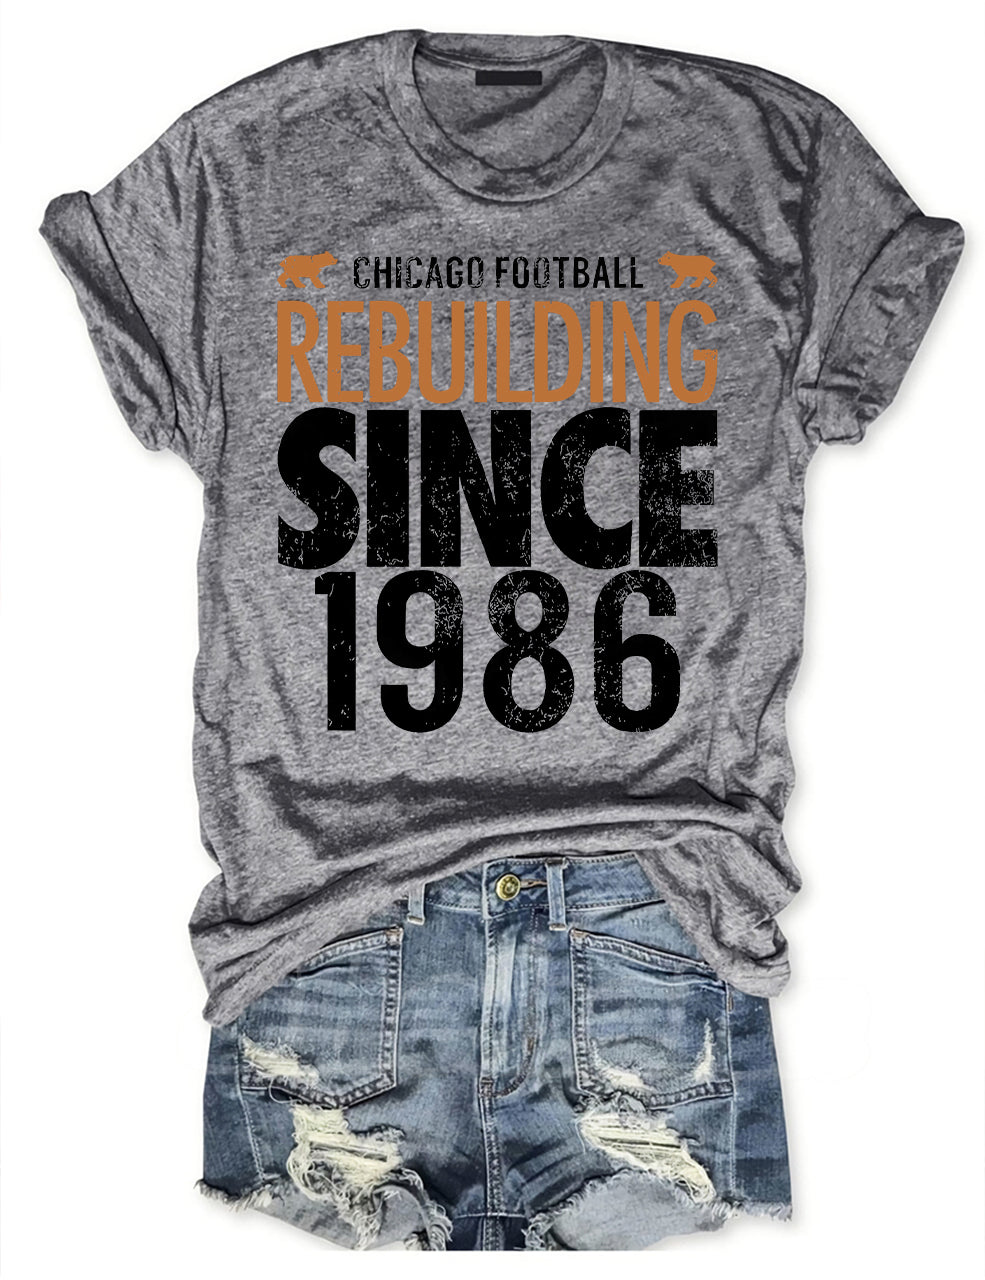 chicago bears rebuilding since 1986